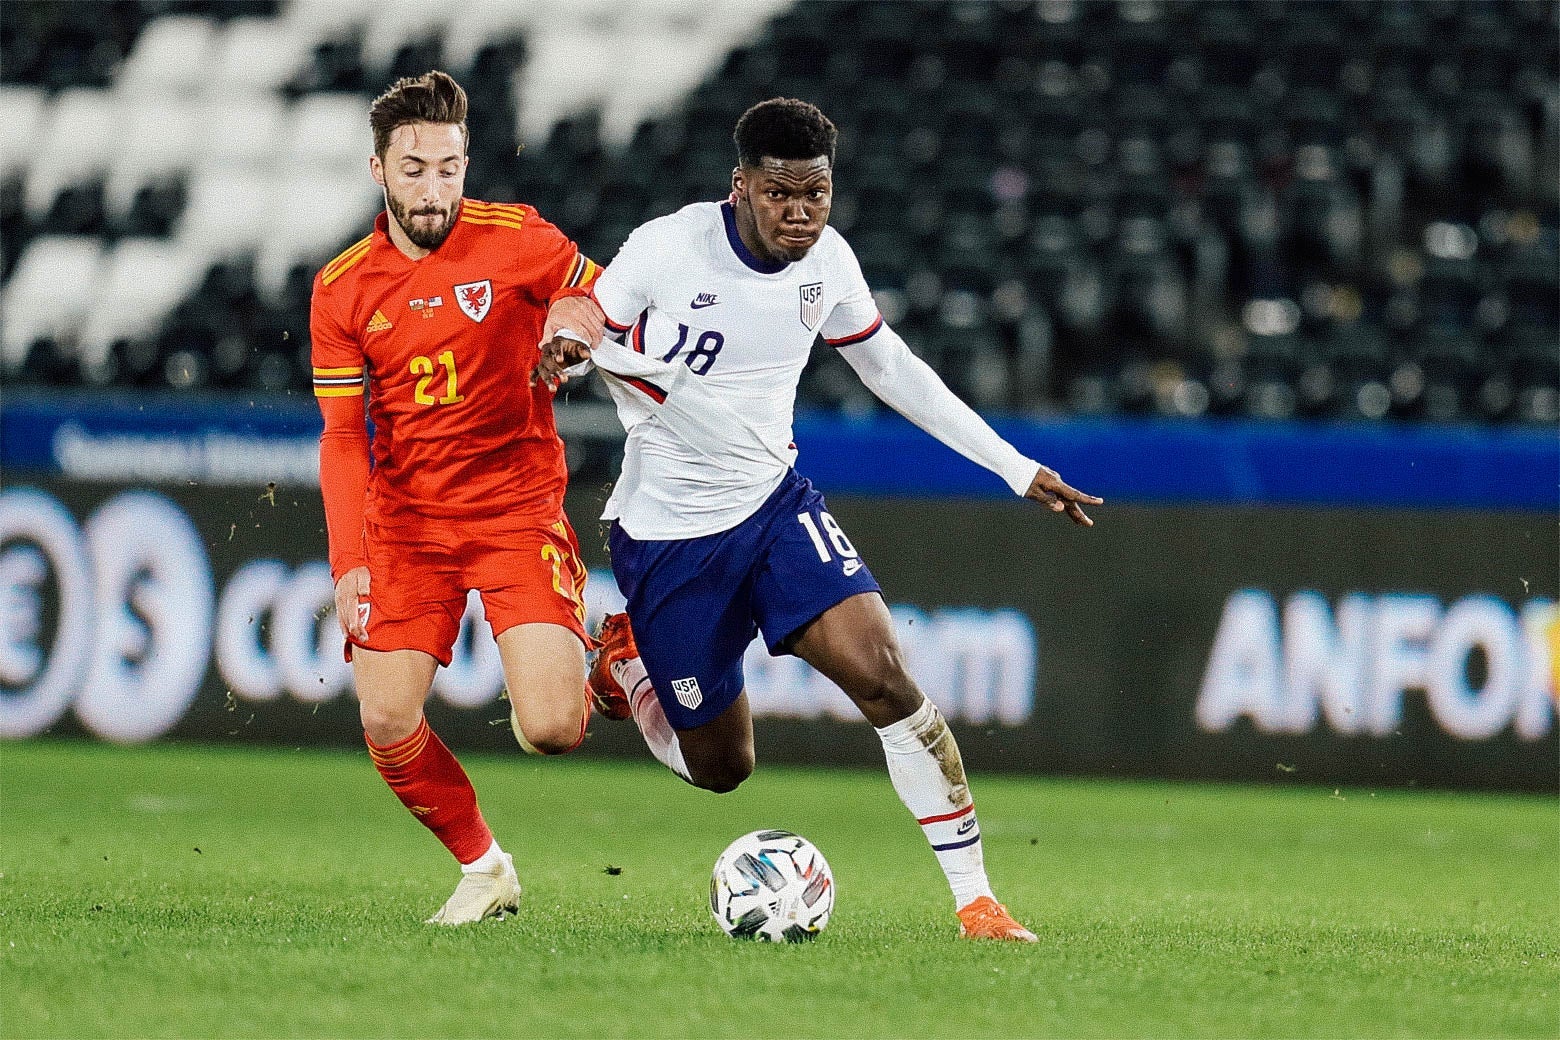 Yunus Musah dribbles a soccer ball in a game against Wales.